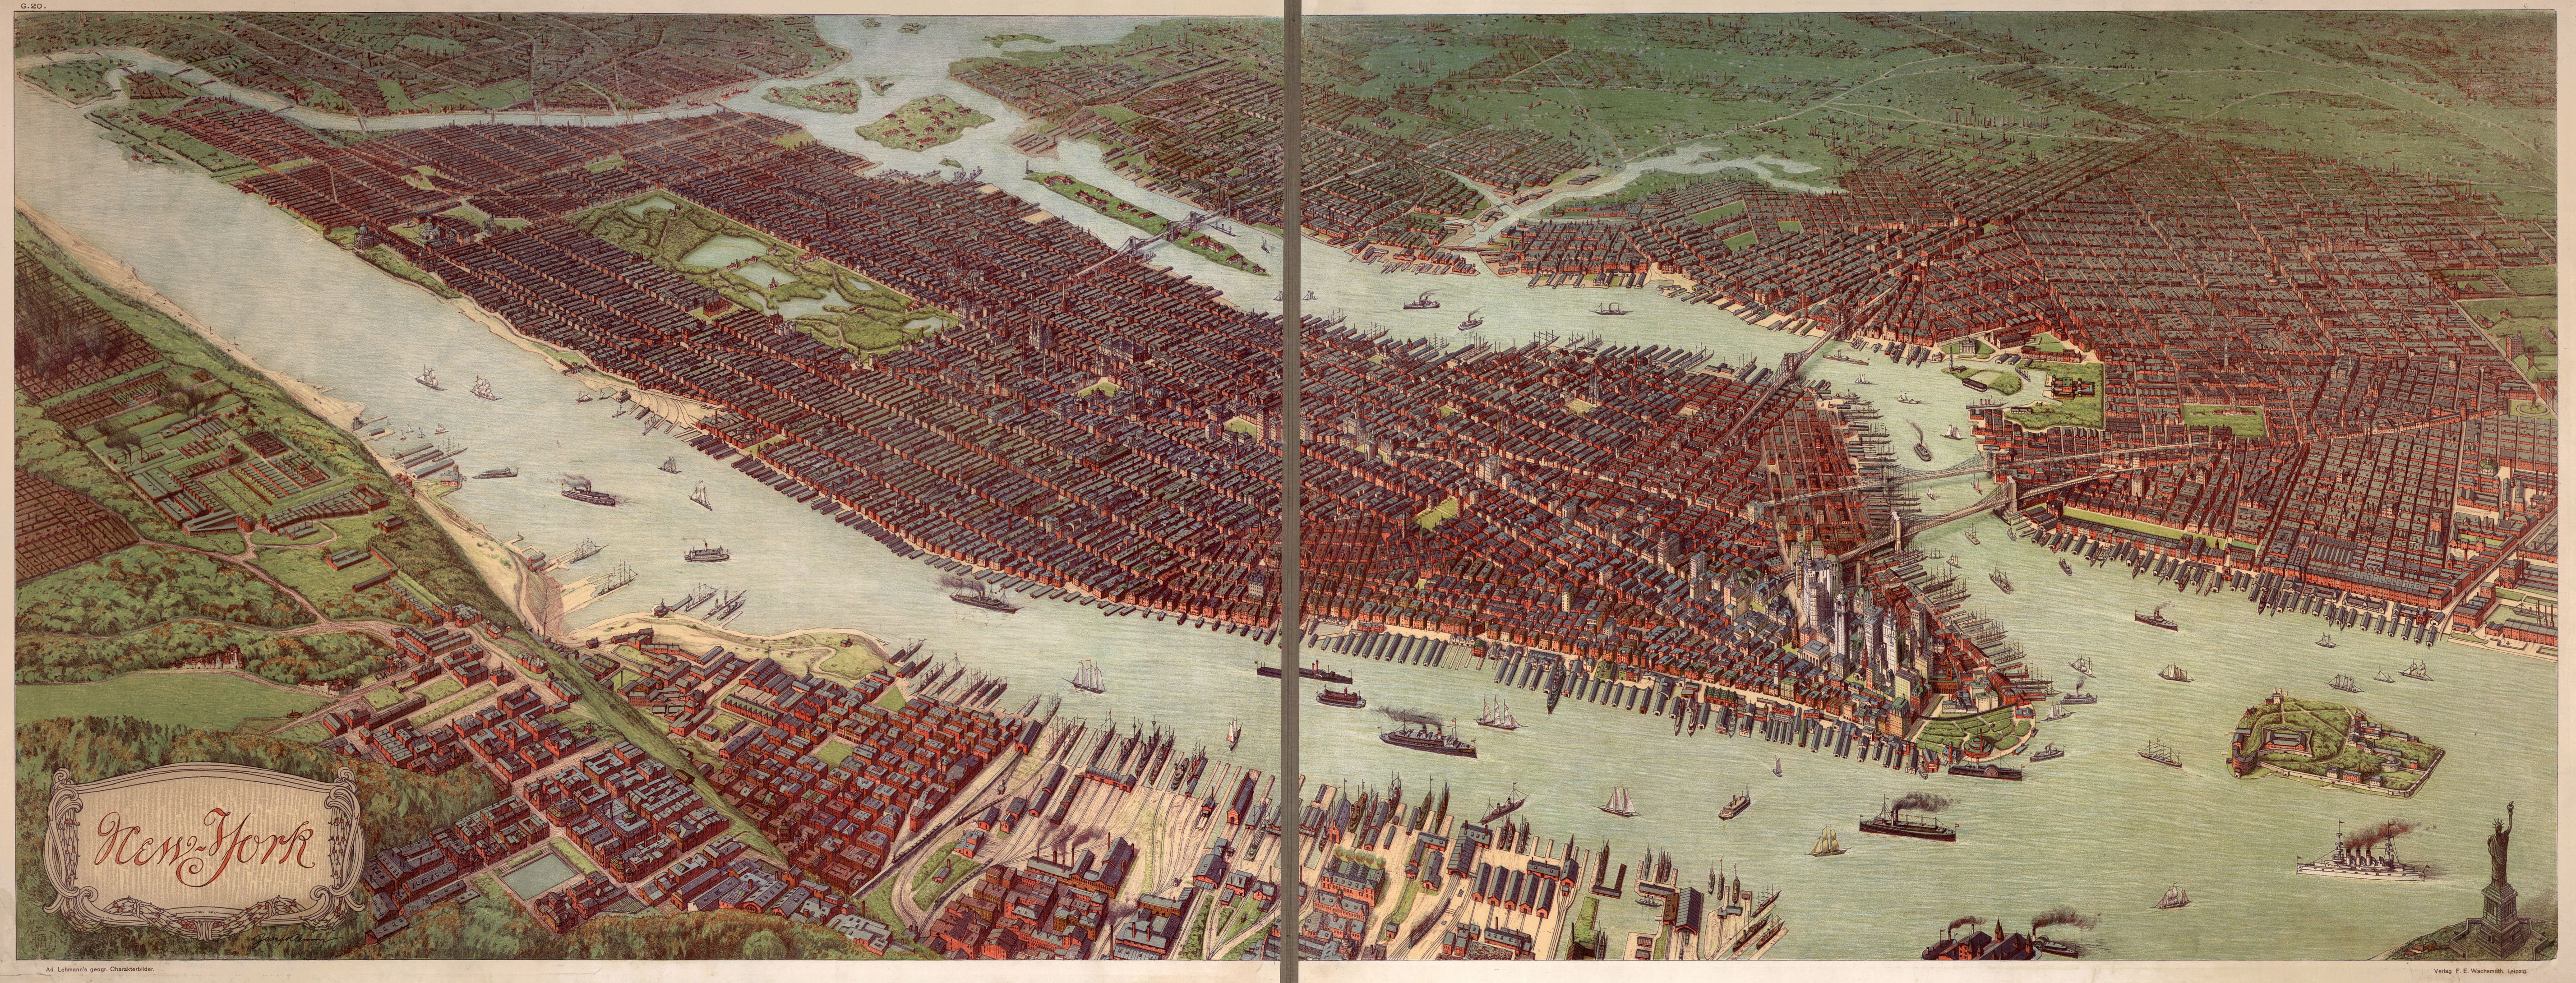 Birds-eye view of Manhattan and greater New York. 1908